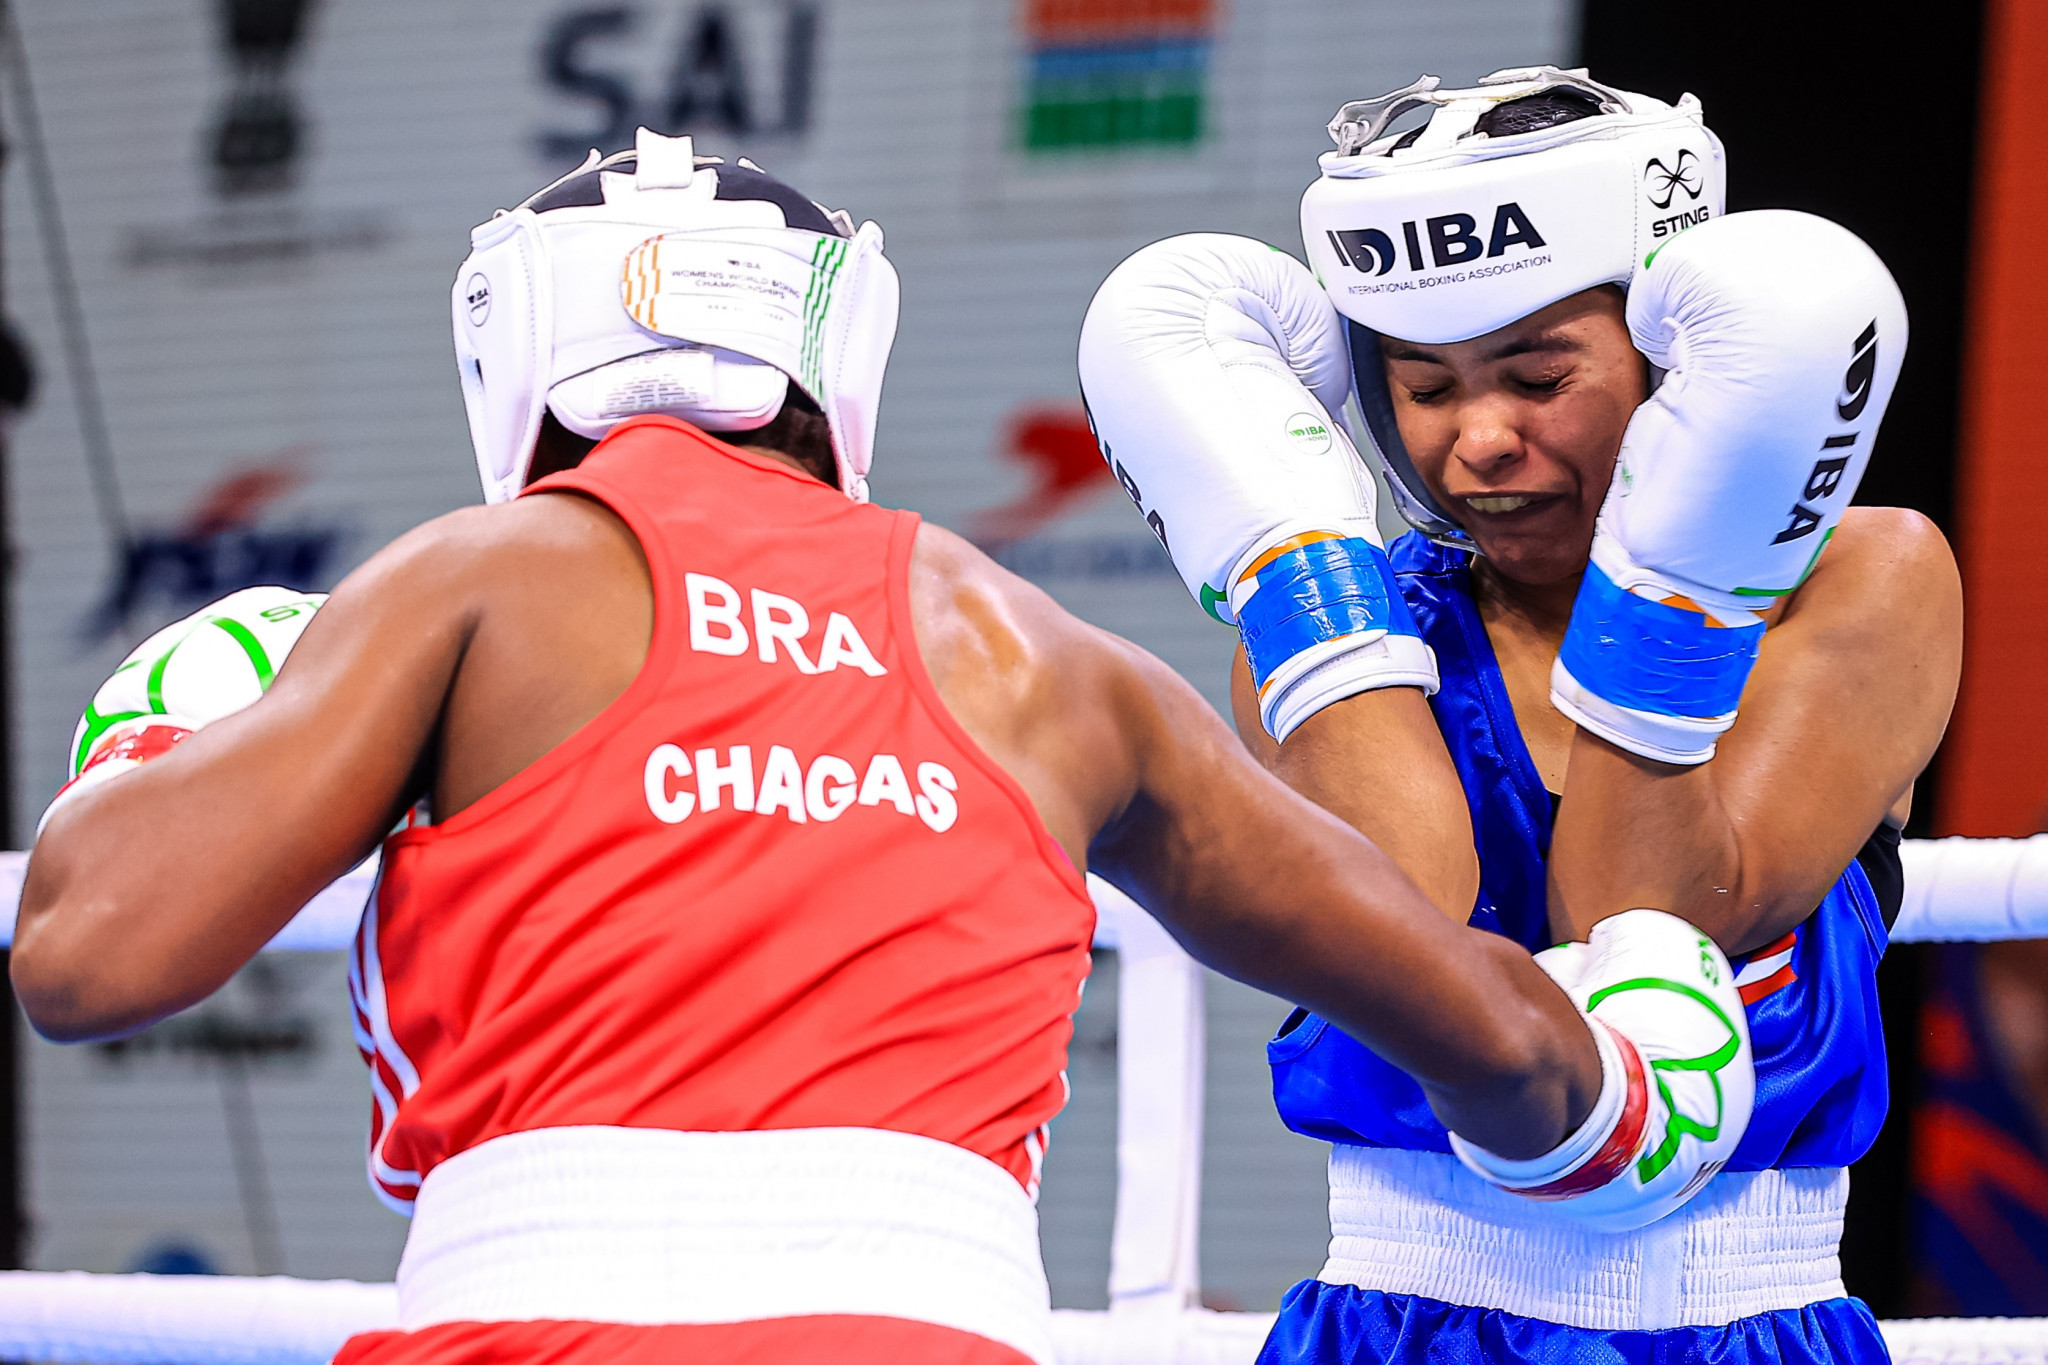 Tatiana Chagas of Brazil lands a blow to the stomach during her victory ©IBA